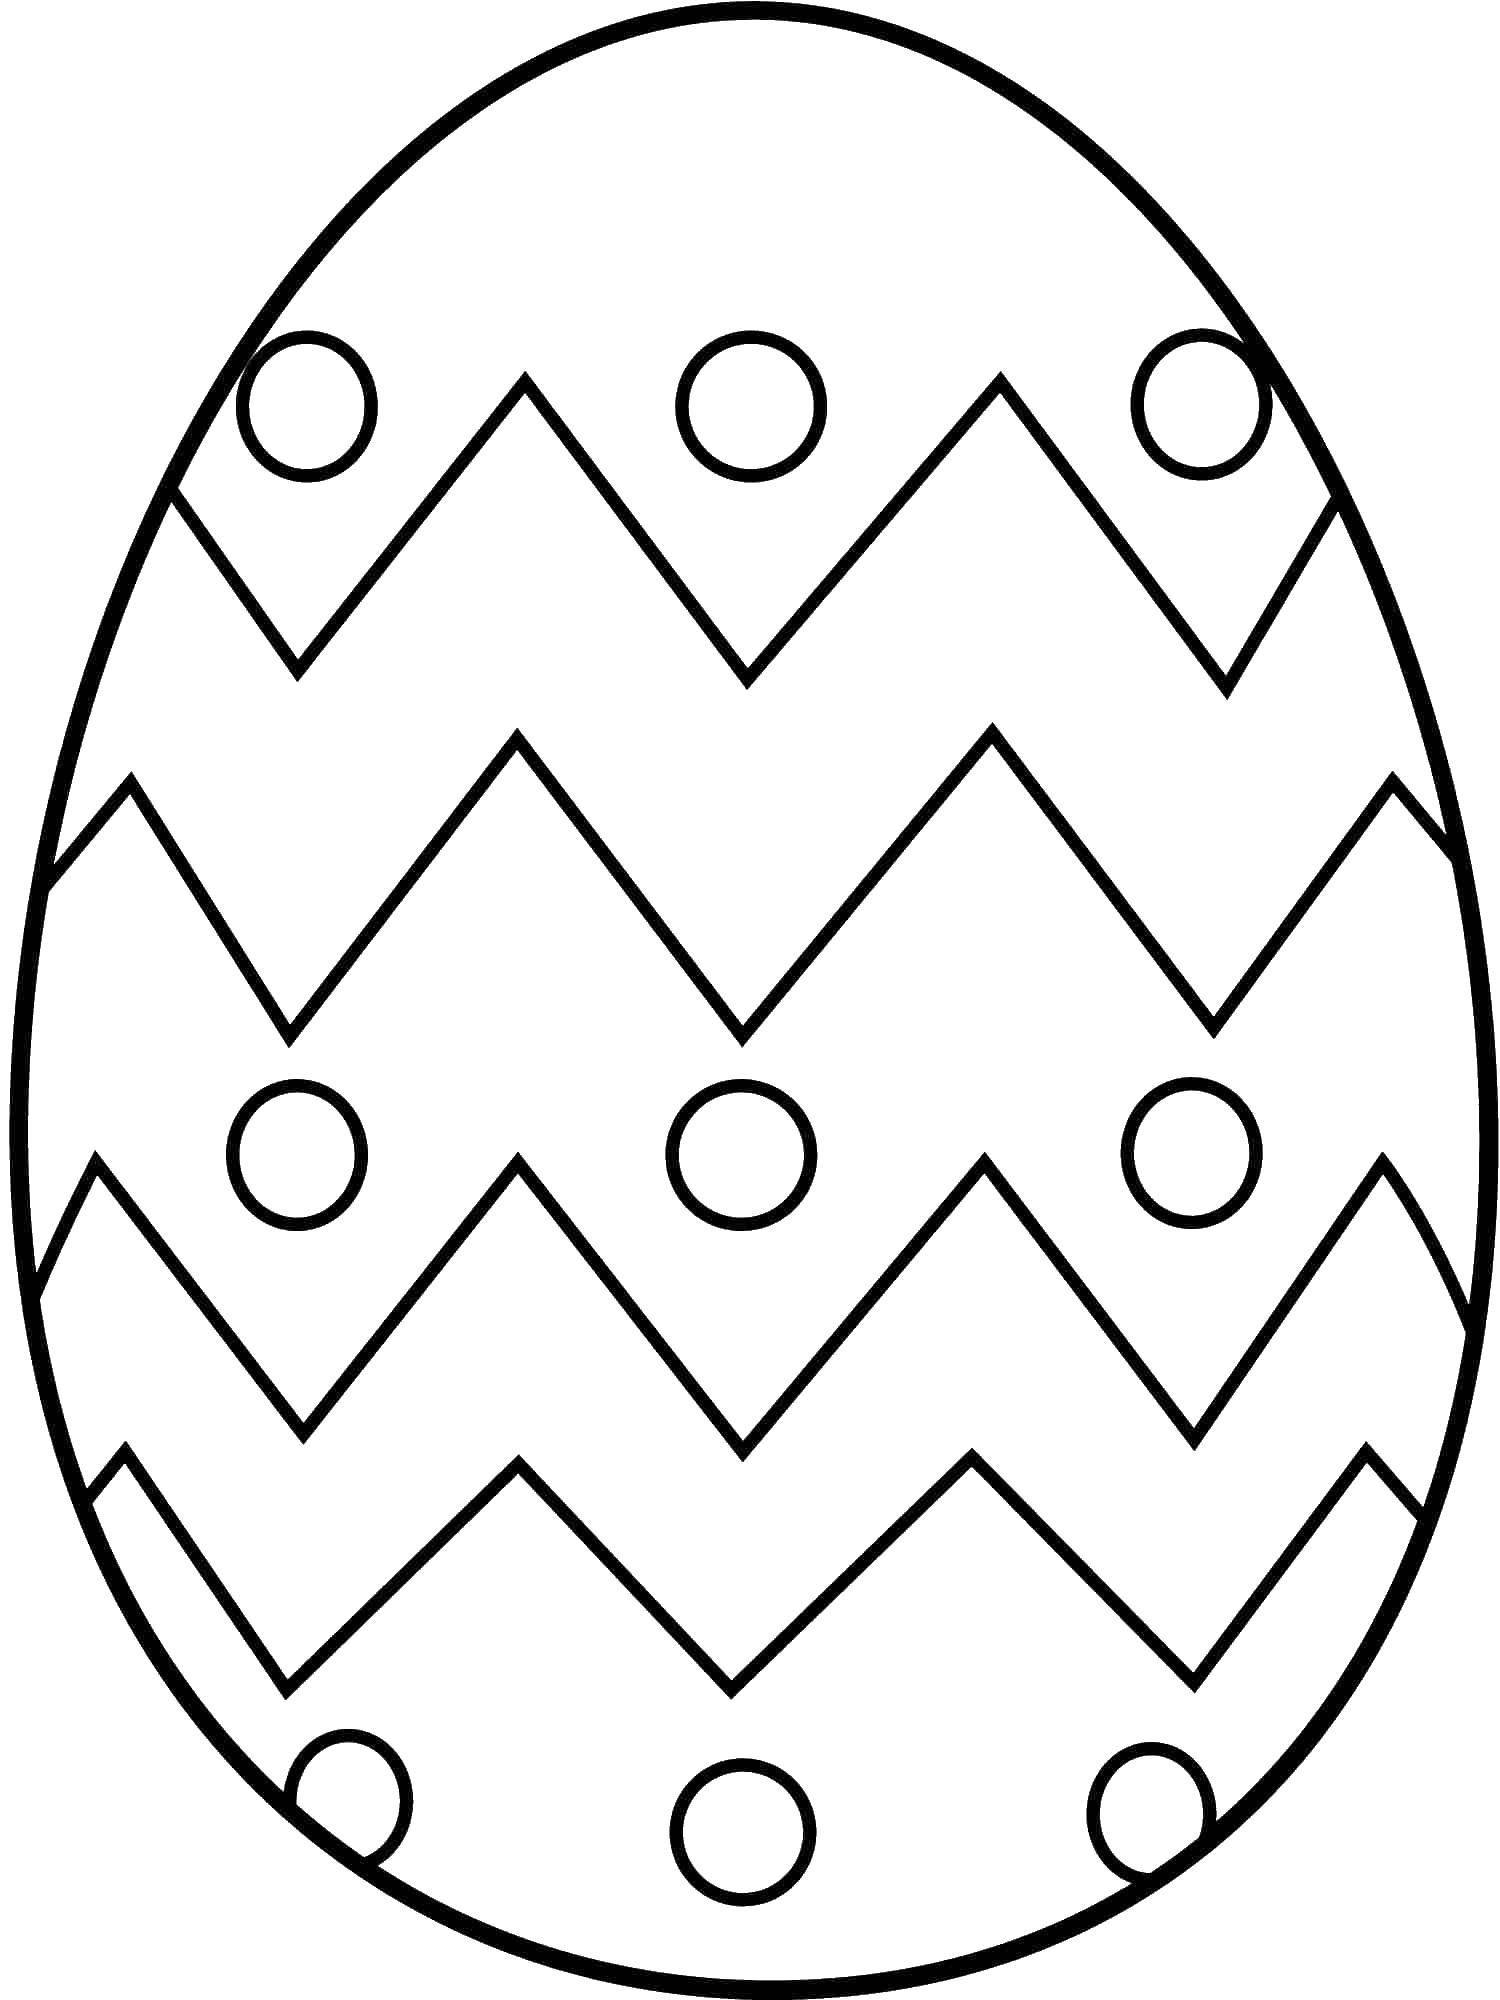 Coloring Easter eggs. Category Easter eggs. Tags:  Easter eggs, basket, Easter.